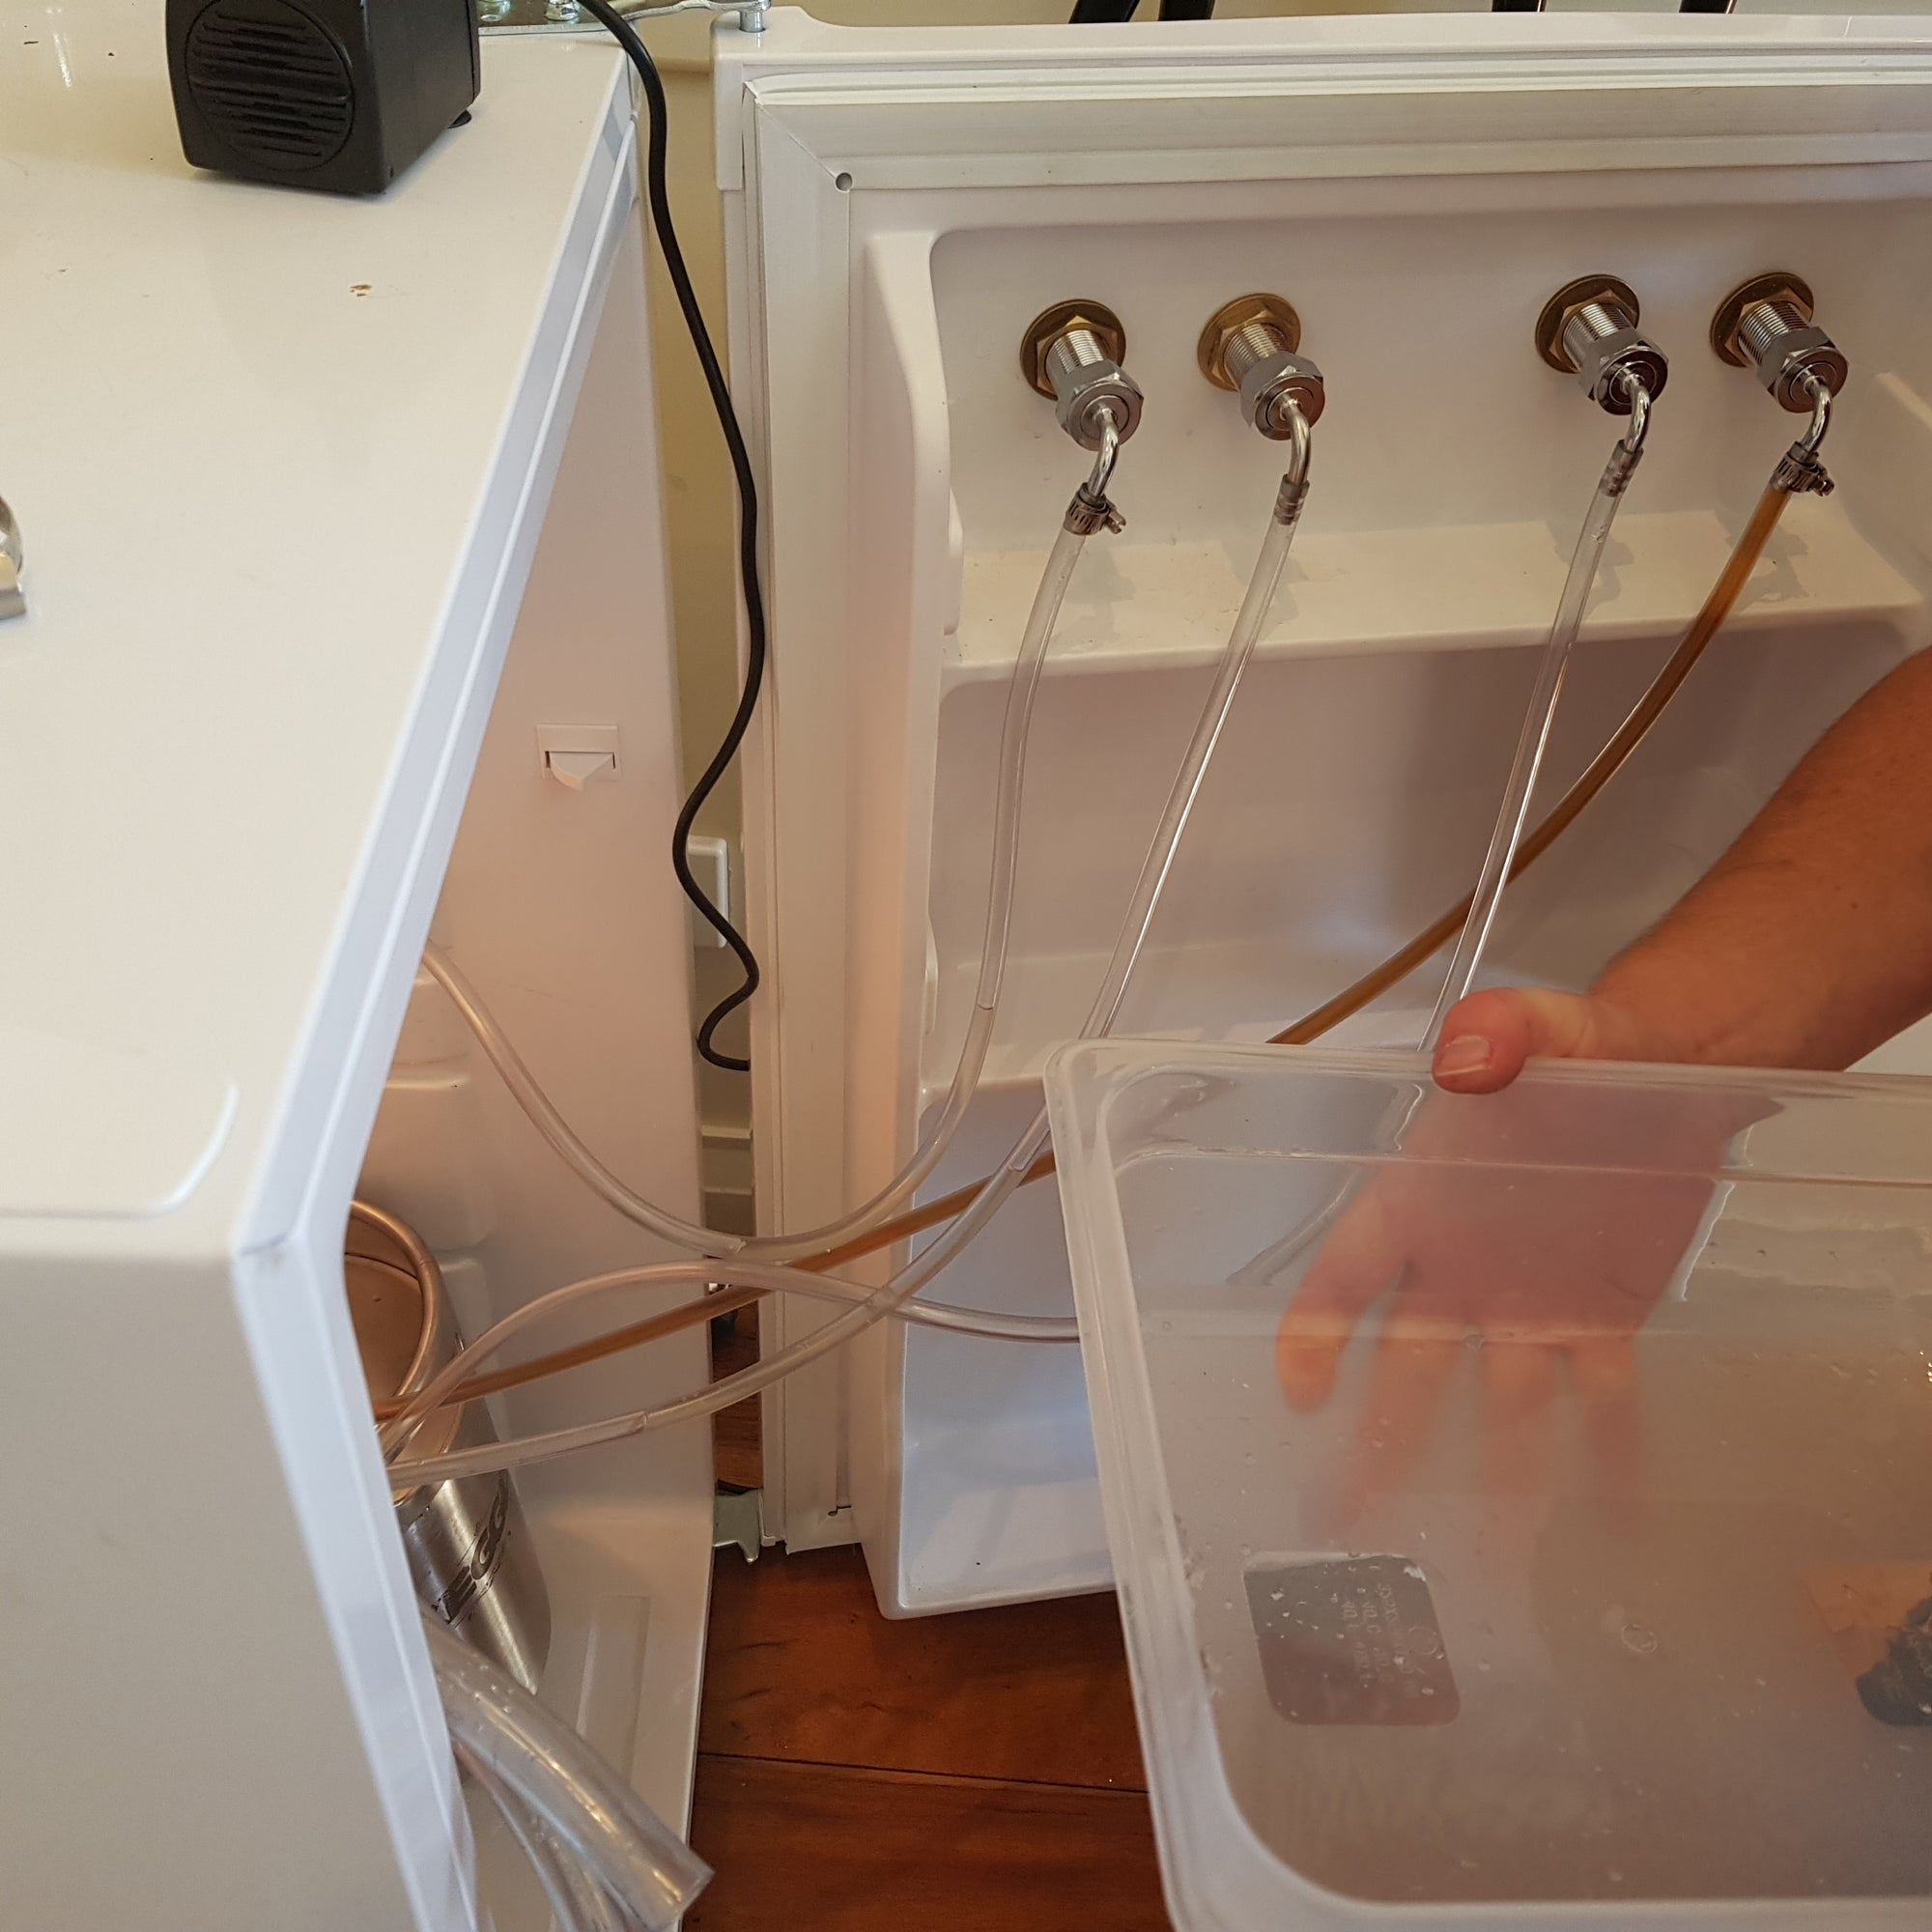 How To Temperature Control Your Fermenter For Under $100